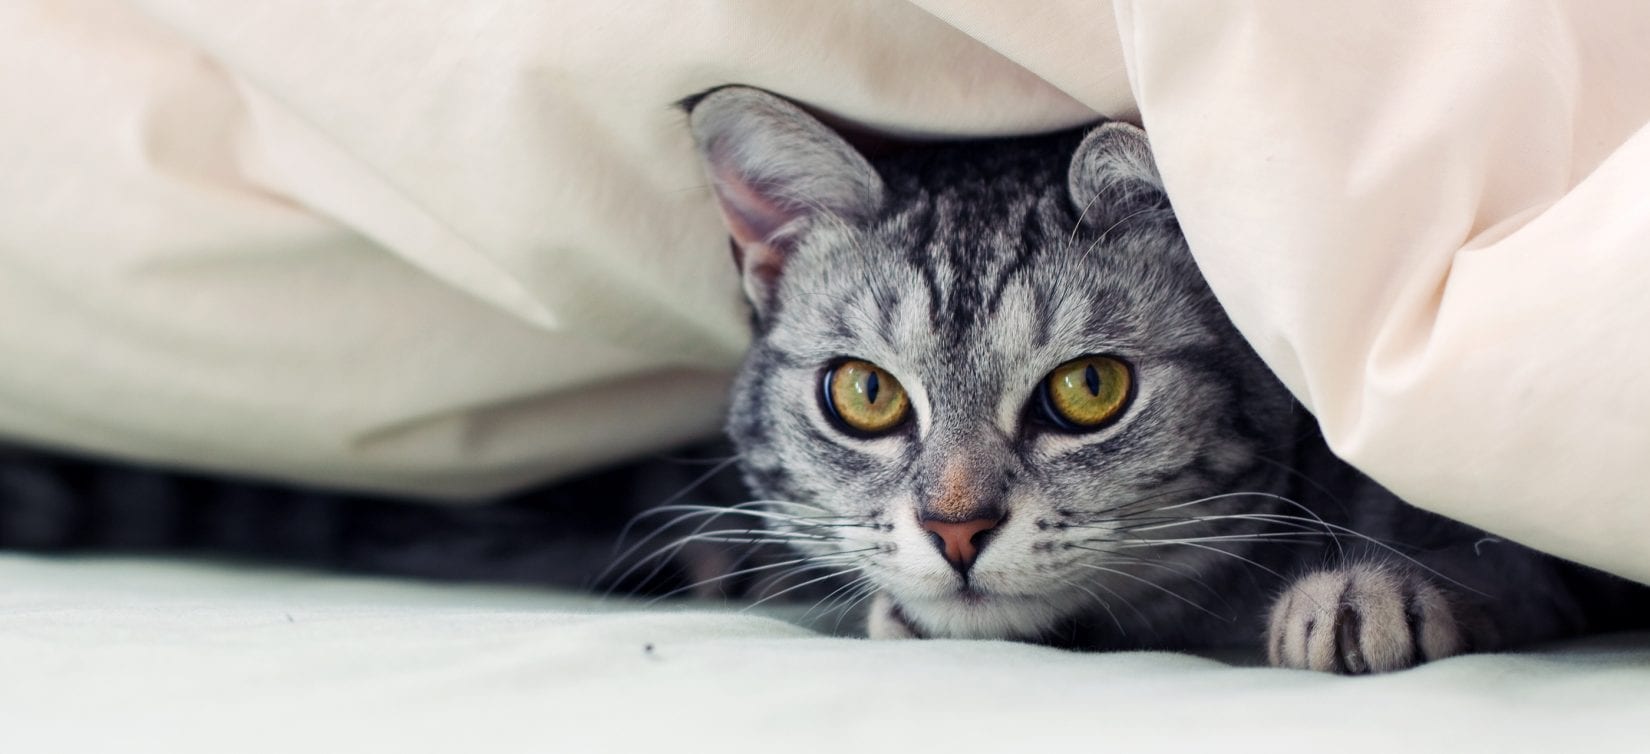 Scared cat hiding under covers